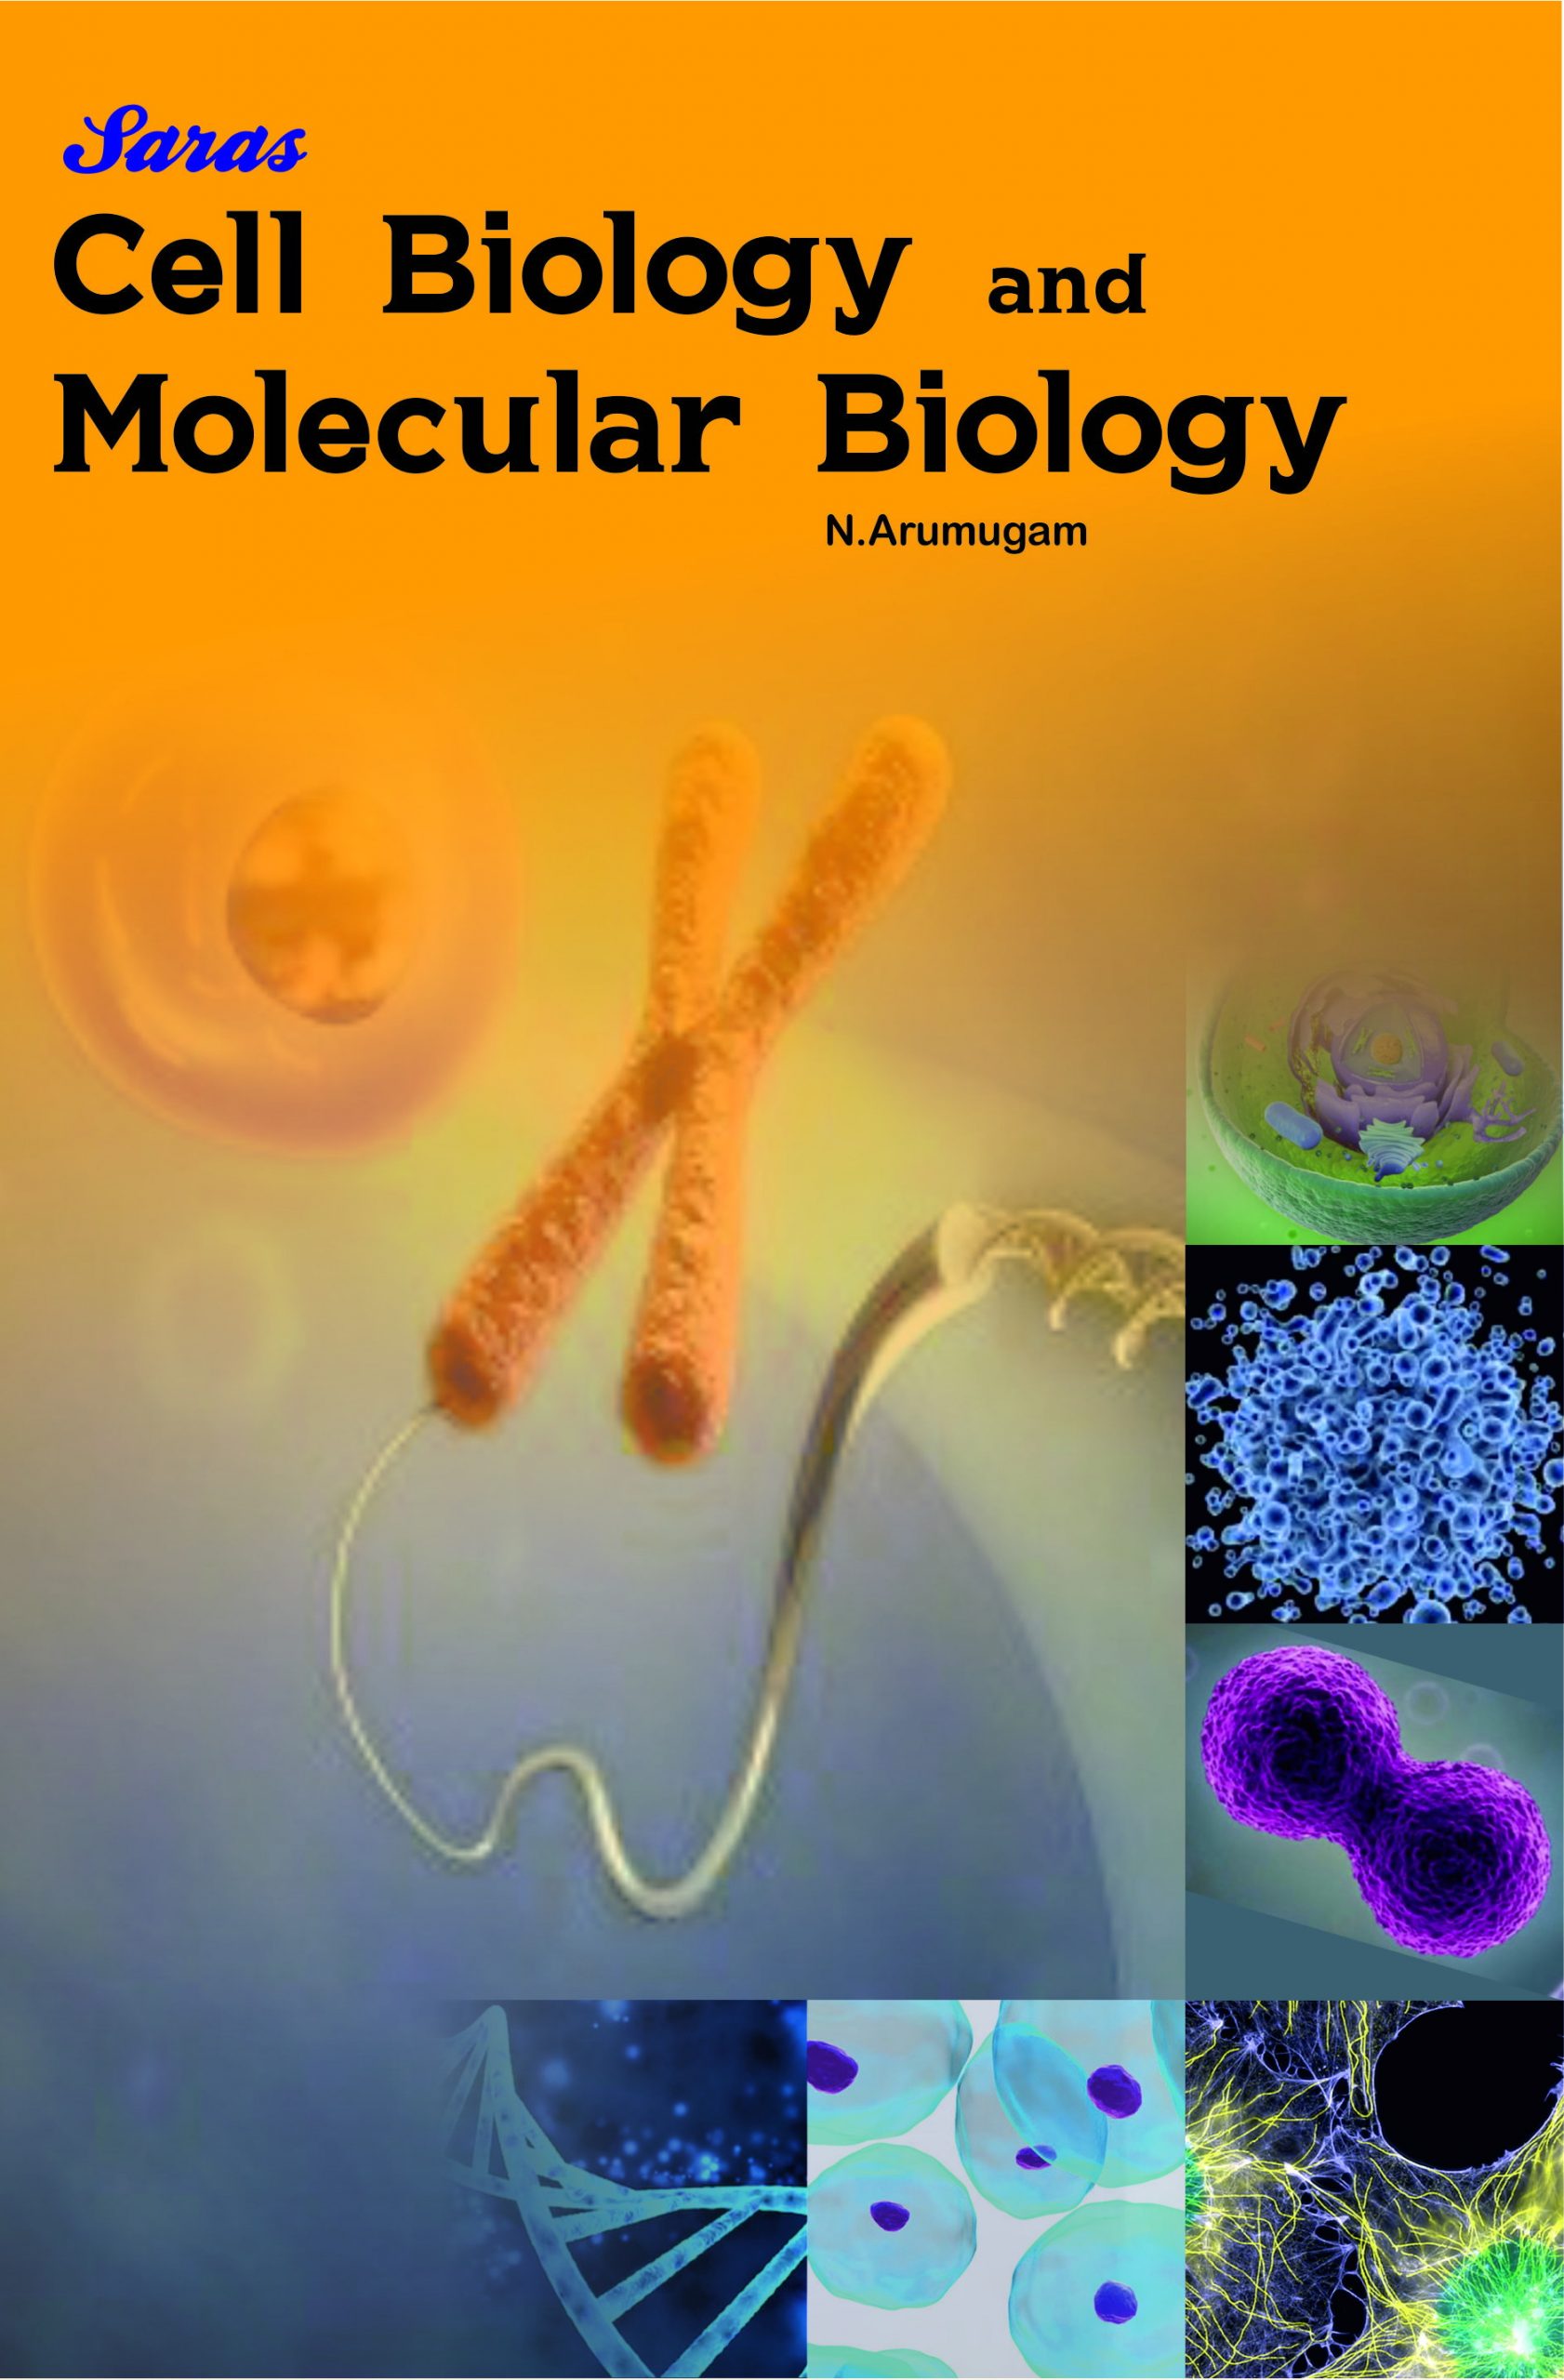 research articles on cell biology